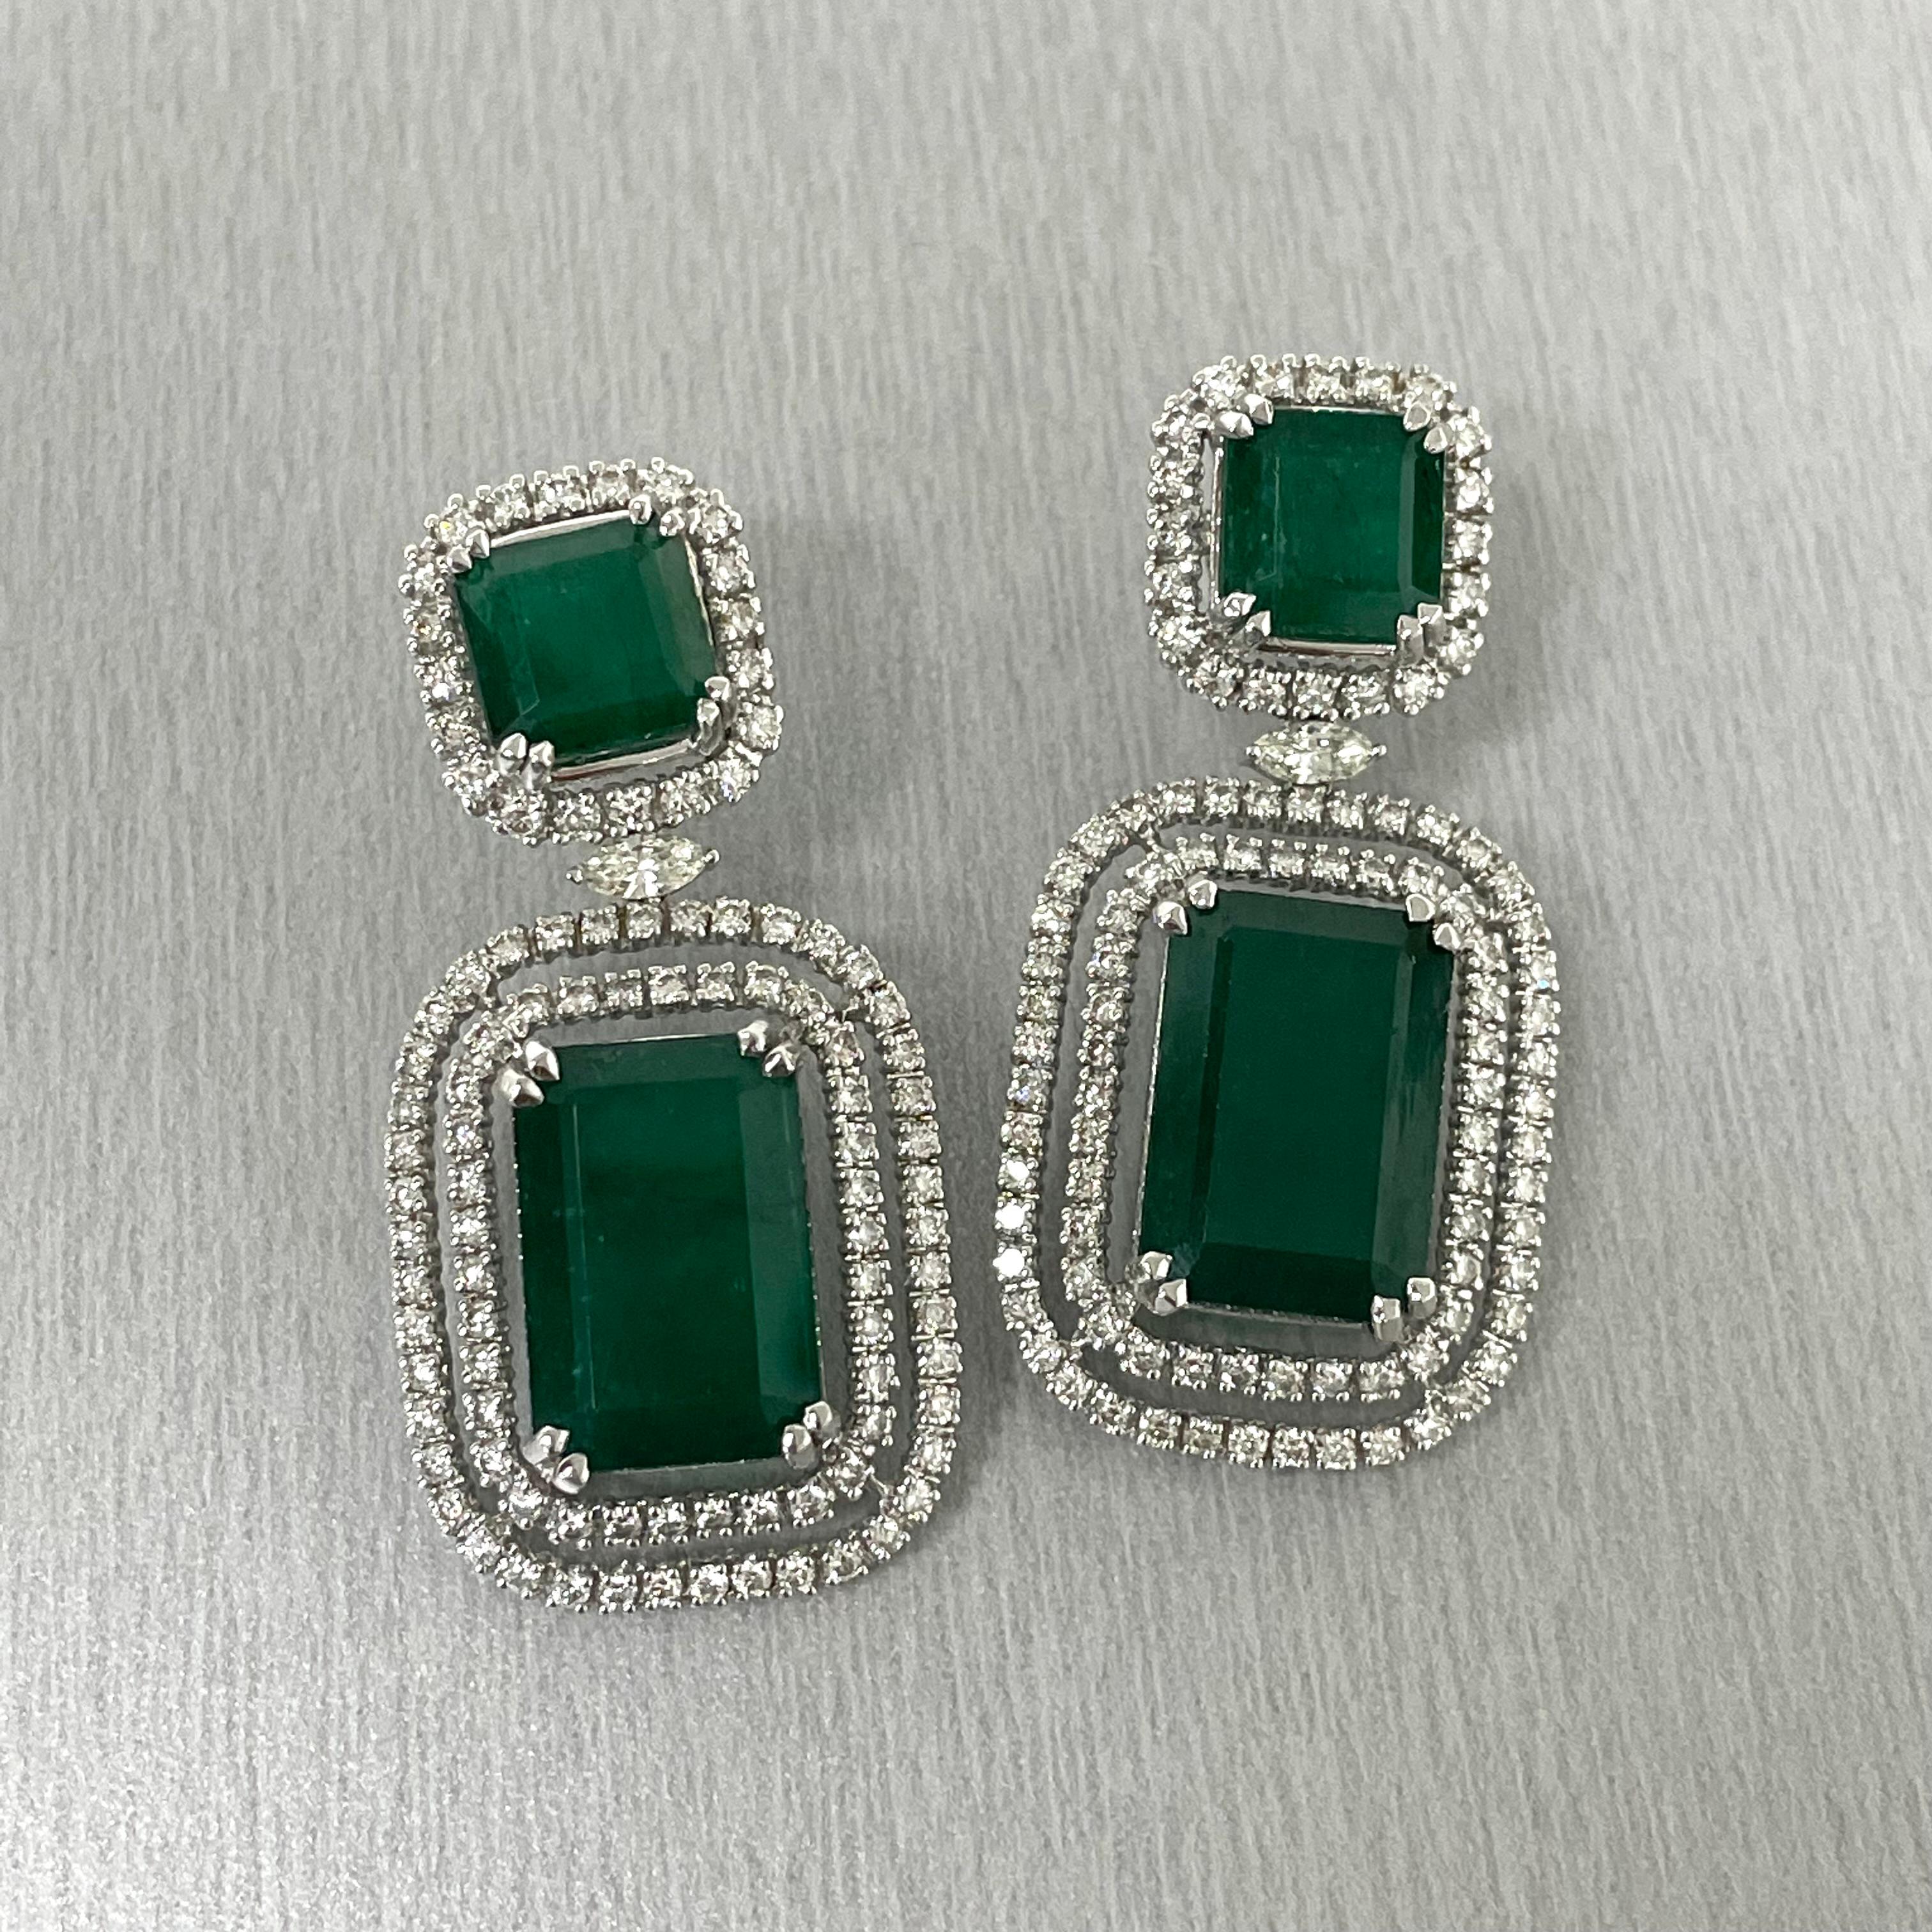 green and white gemstones